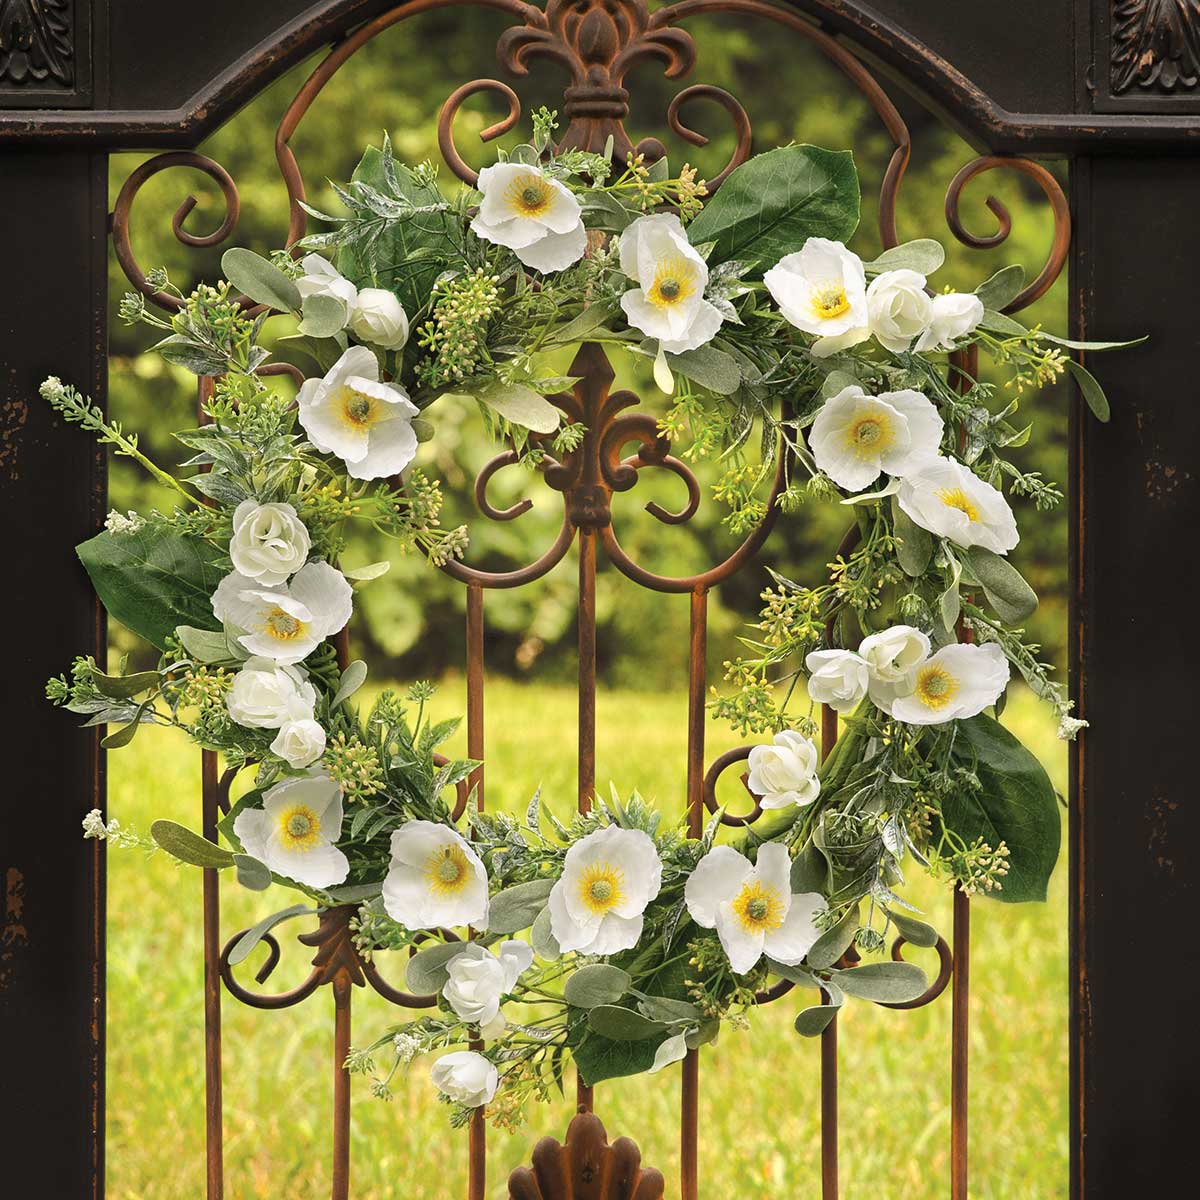 WREATH POPPY/FOLIAGE 22IN (INNER RING 11IN) WHITE - Click Image to Close